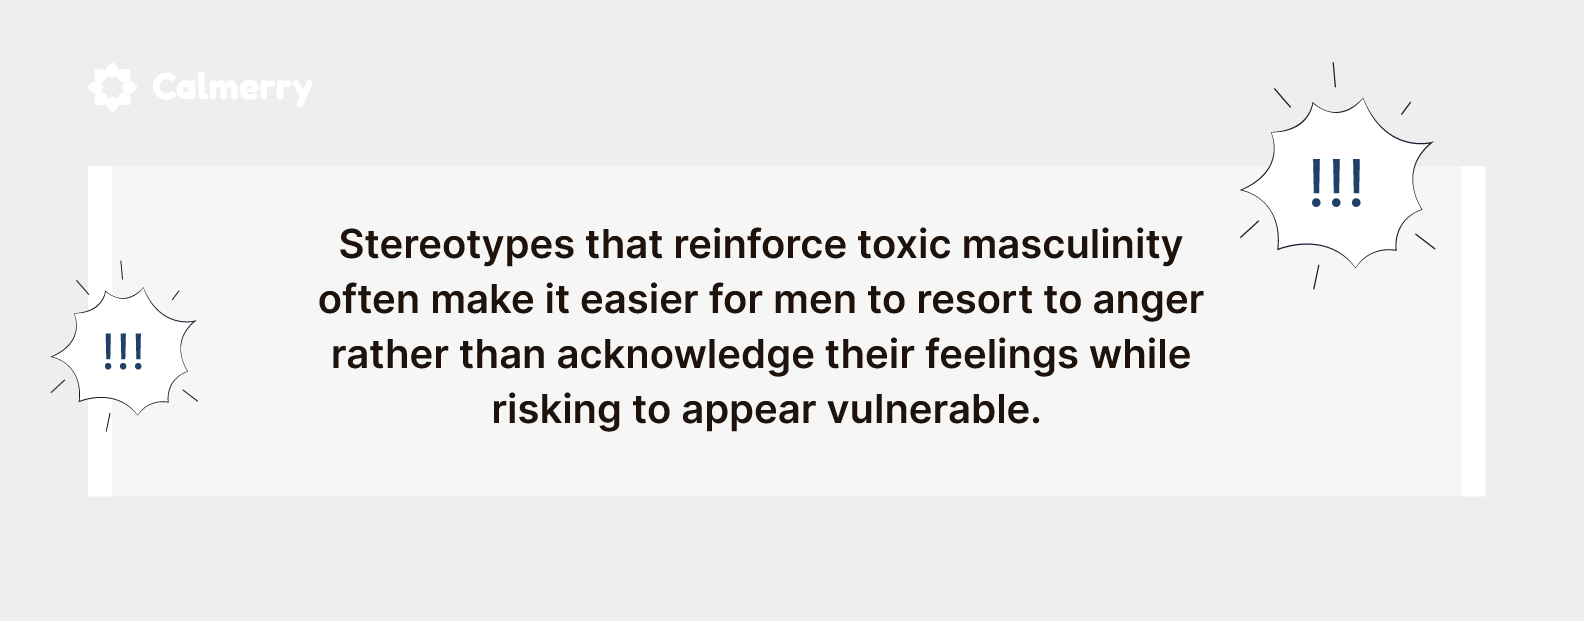 Men may use anger to hide their vulnerability